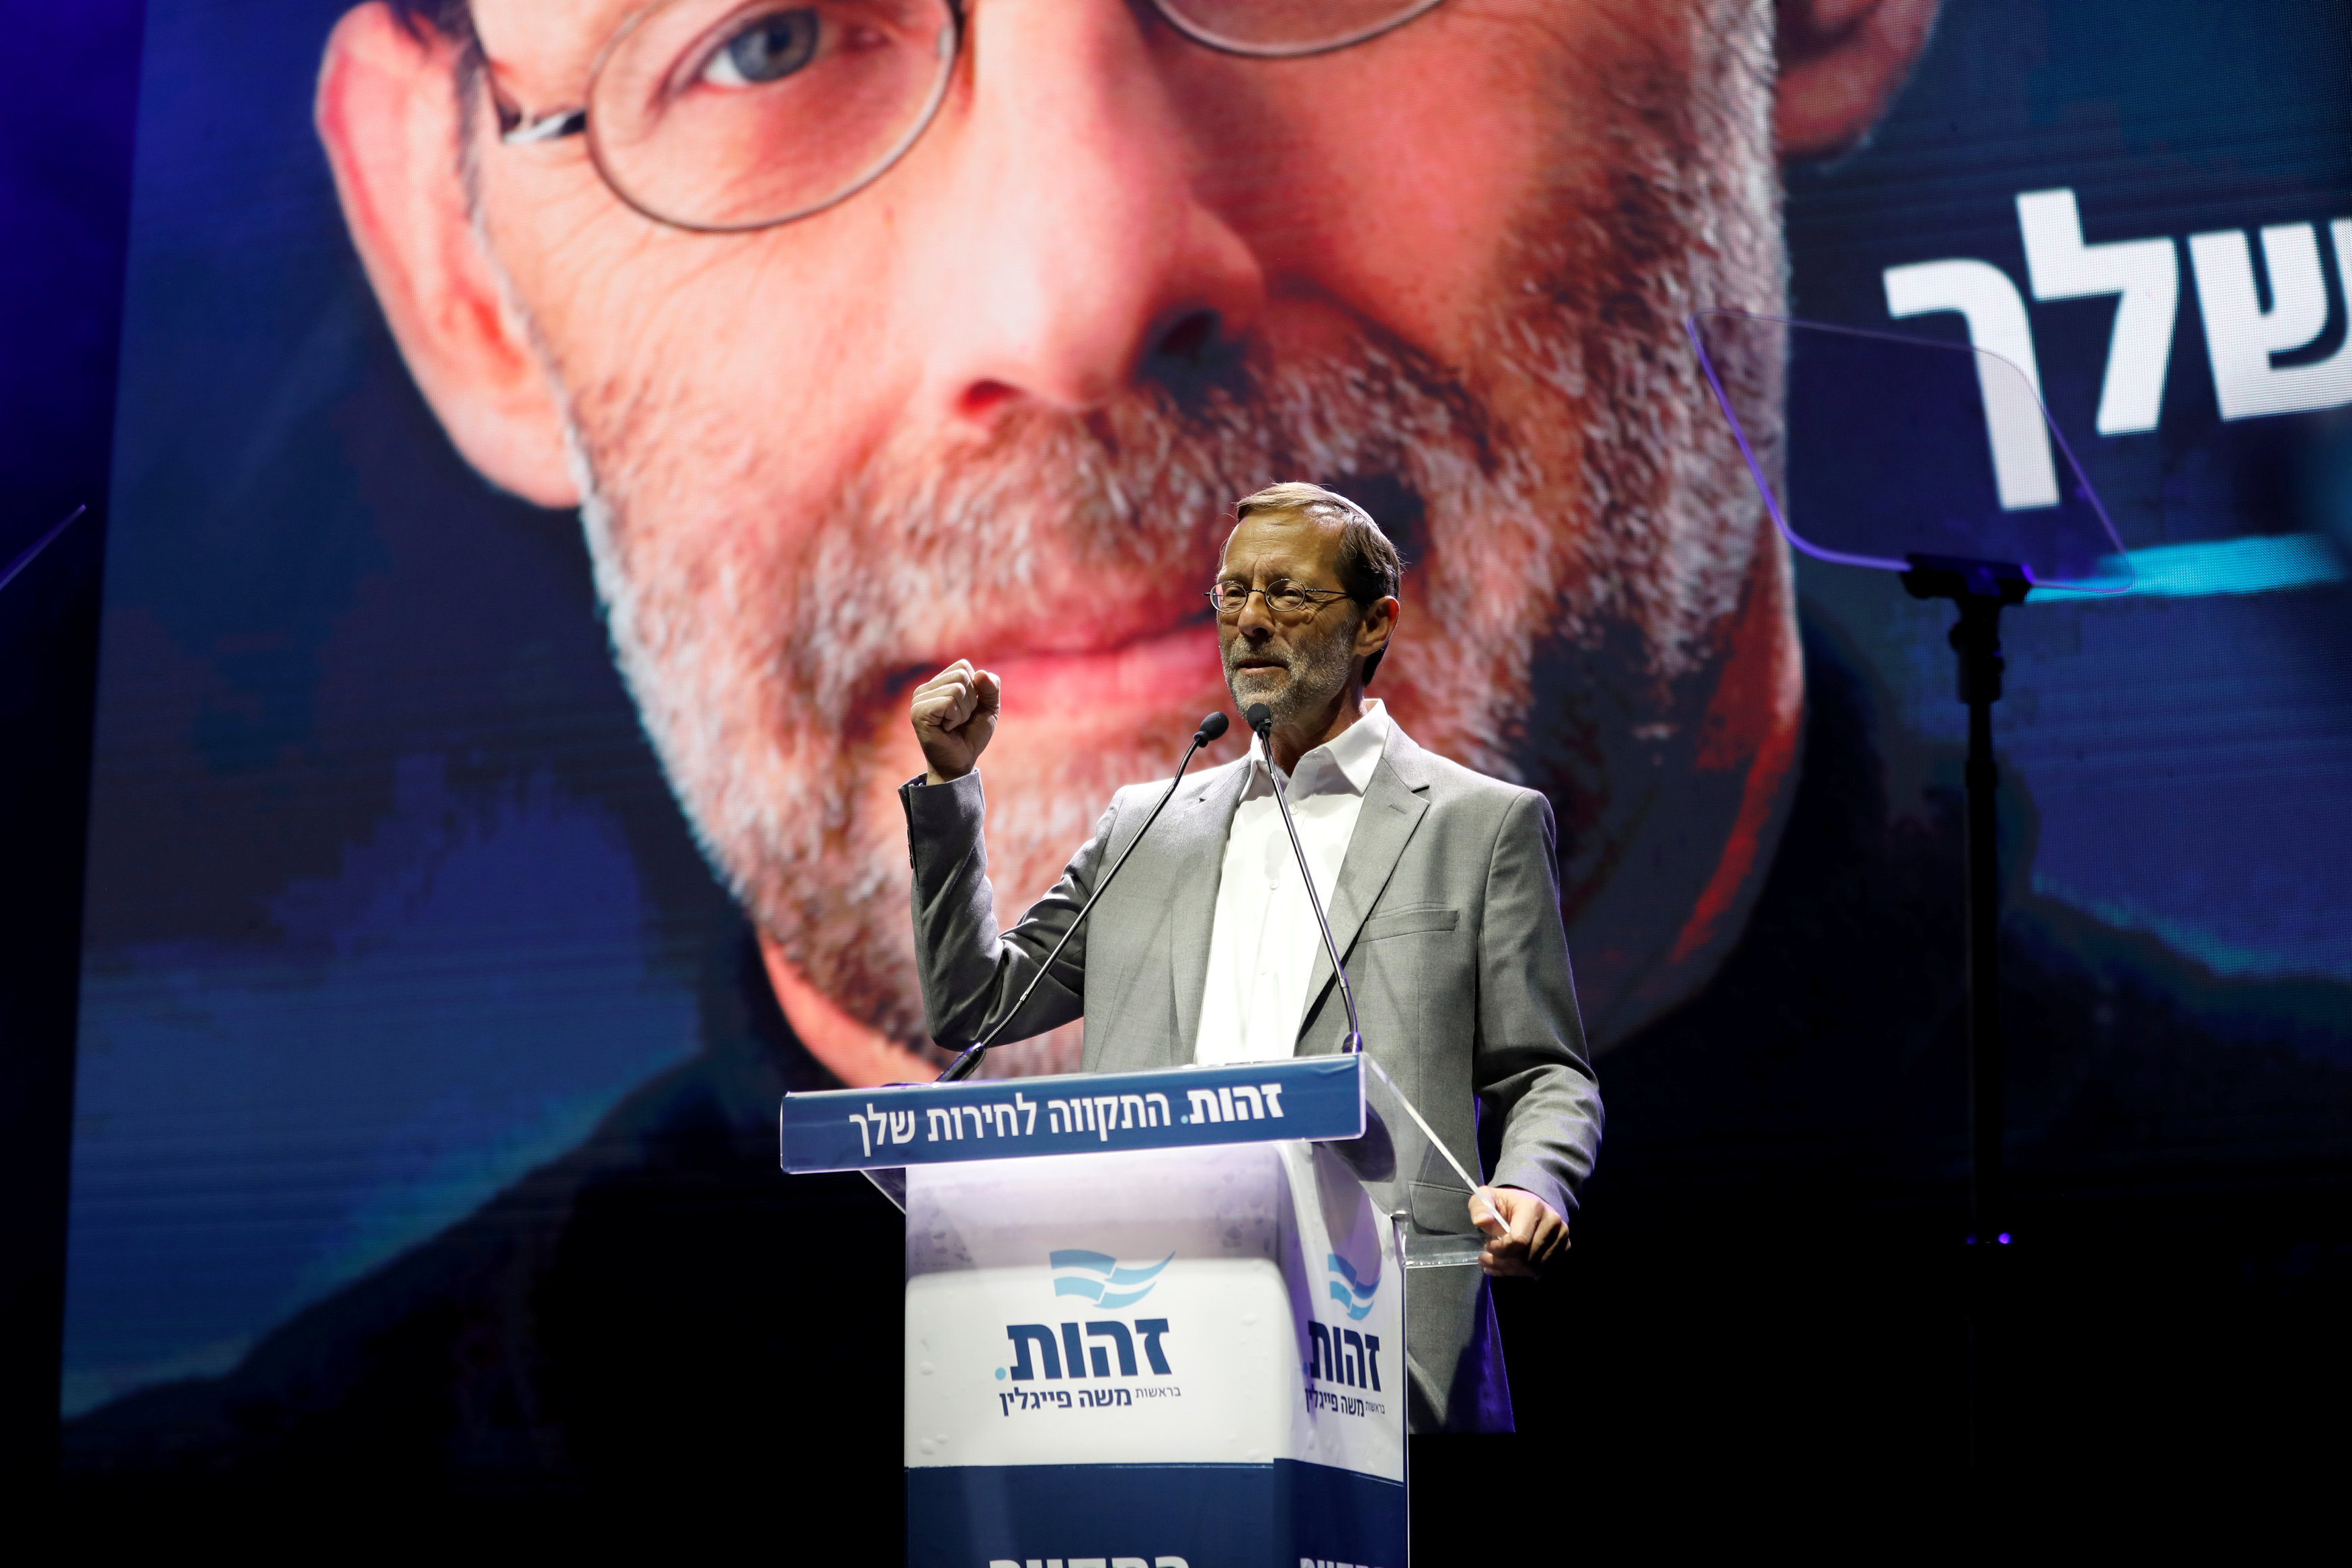 Moshe Feiglin at an election campaign event in Tel Aviv on 2 April 2019 (Reuters)